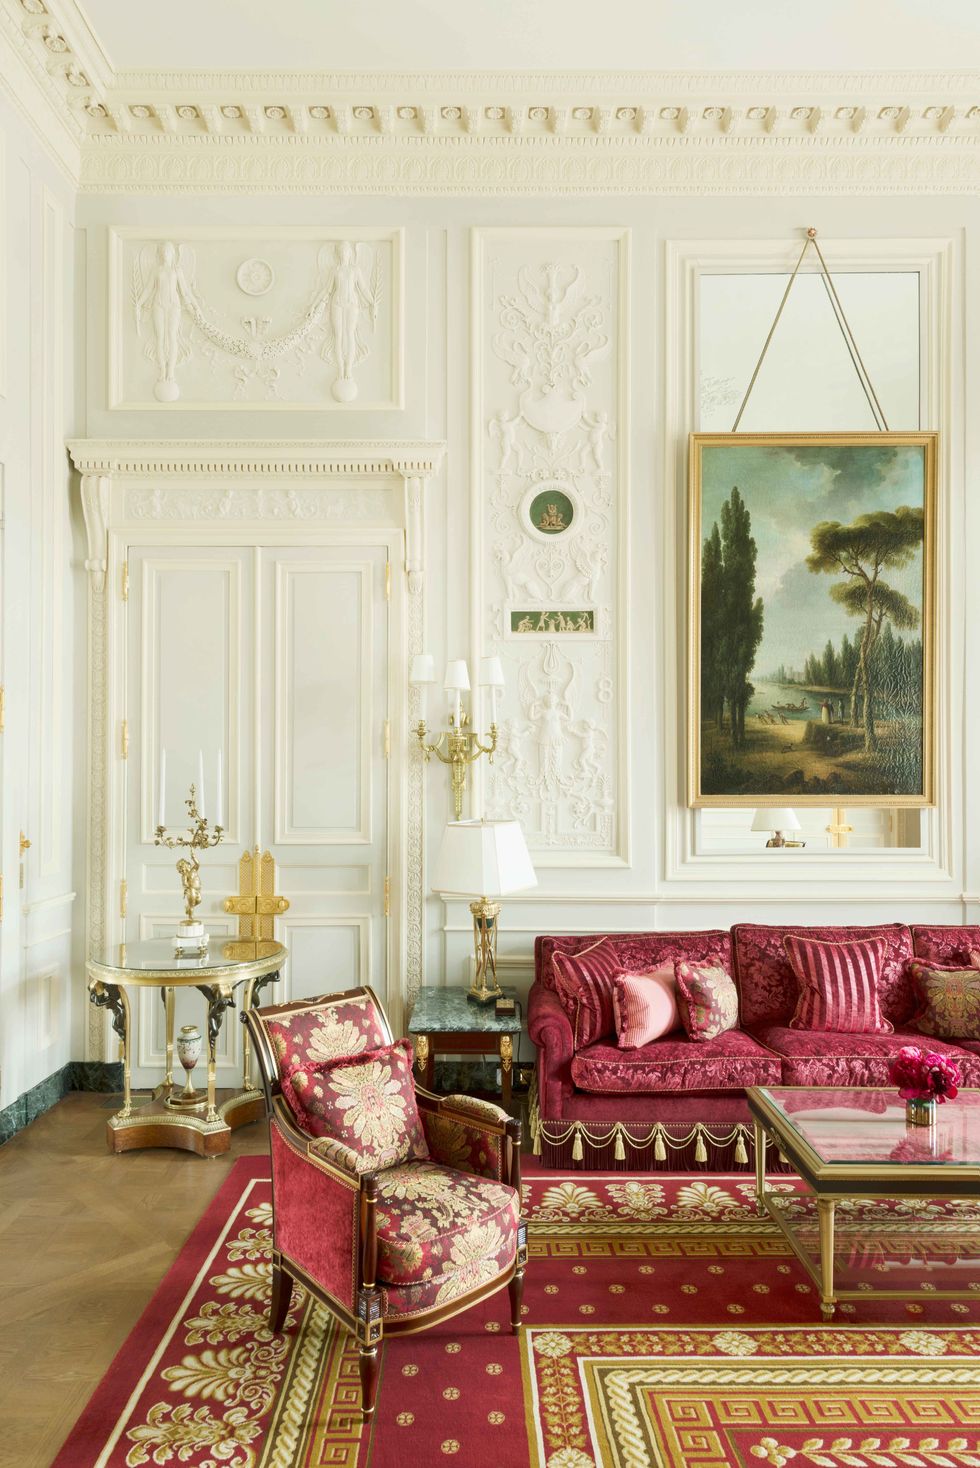 <p>Overlooking Place Vendôme and available from 28,000 euros per night, (about $29,396), the Imperial Suite is registered as a Historic Monument. The 2,660-square-foot room features 20-foot ceilings and a bedroom designed to replicate Marie Antoinette's at Versailles. Fashion designer Karl Lagerfeld once held a Chanel couture show in the suite, to observe the 25th anniversary of Coco Chanel's death.<br></p><p><span class="redactor-invisible-space" data-verified="redactor" data-redactor-tag="span" data-redactor-class="redactor-invisible-space"></span></p>